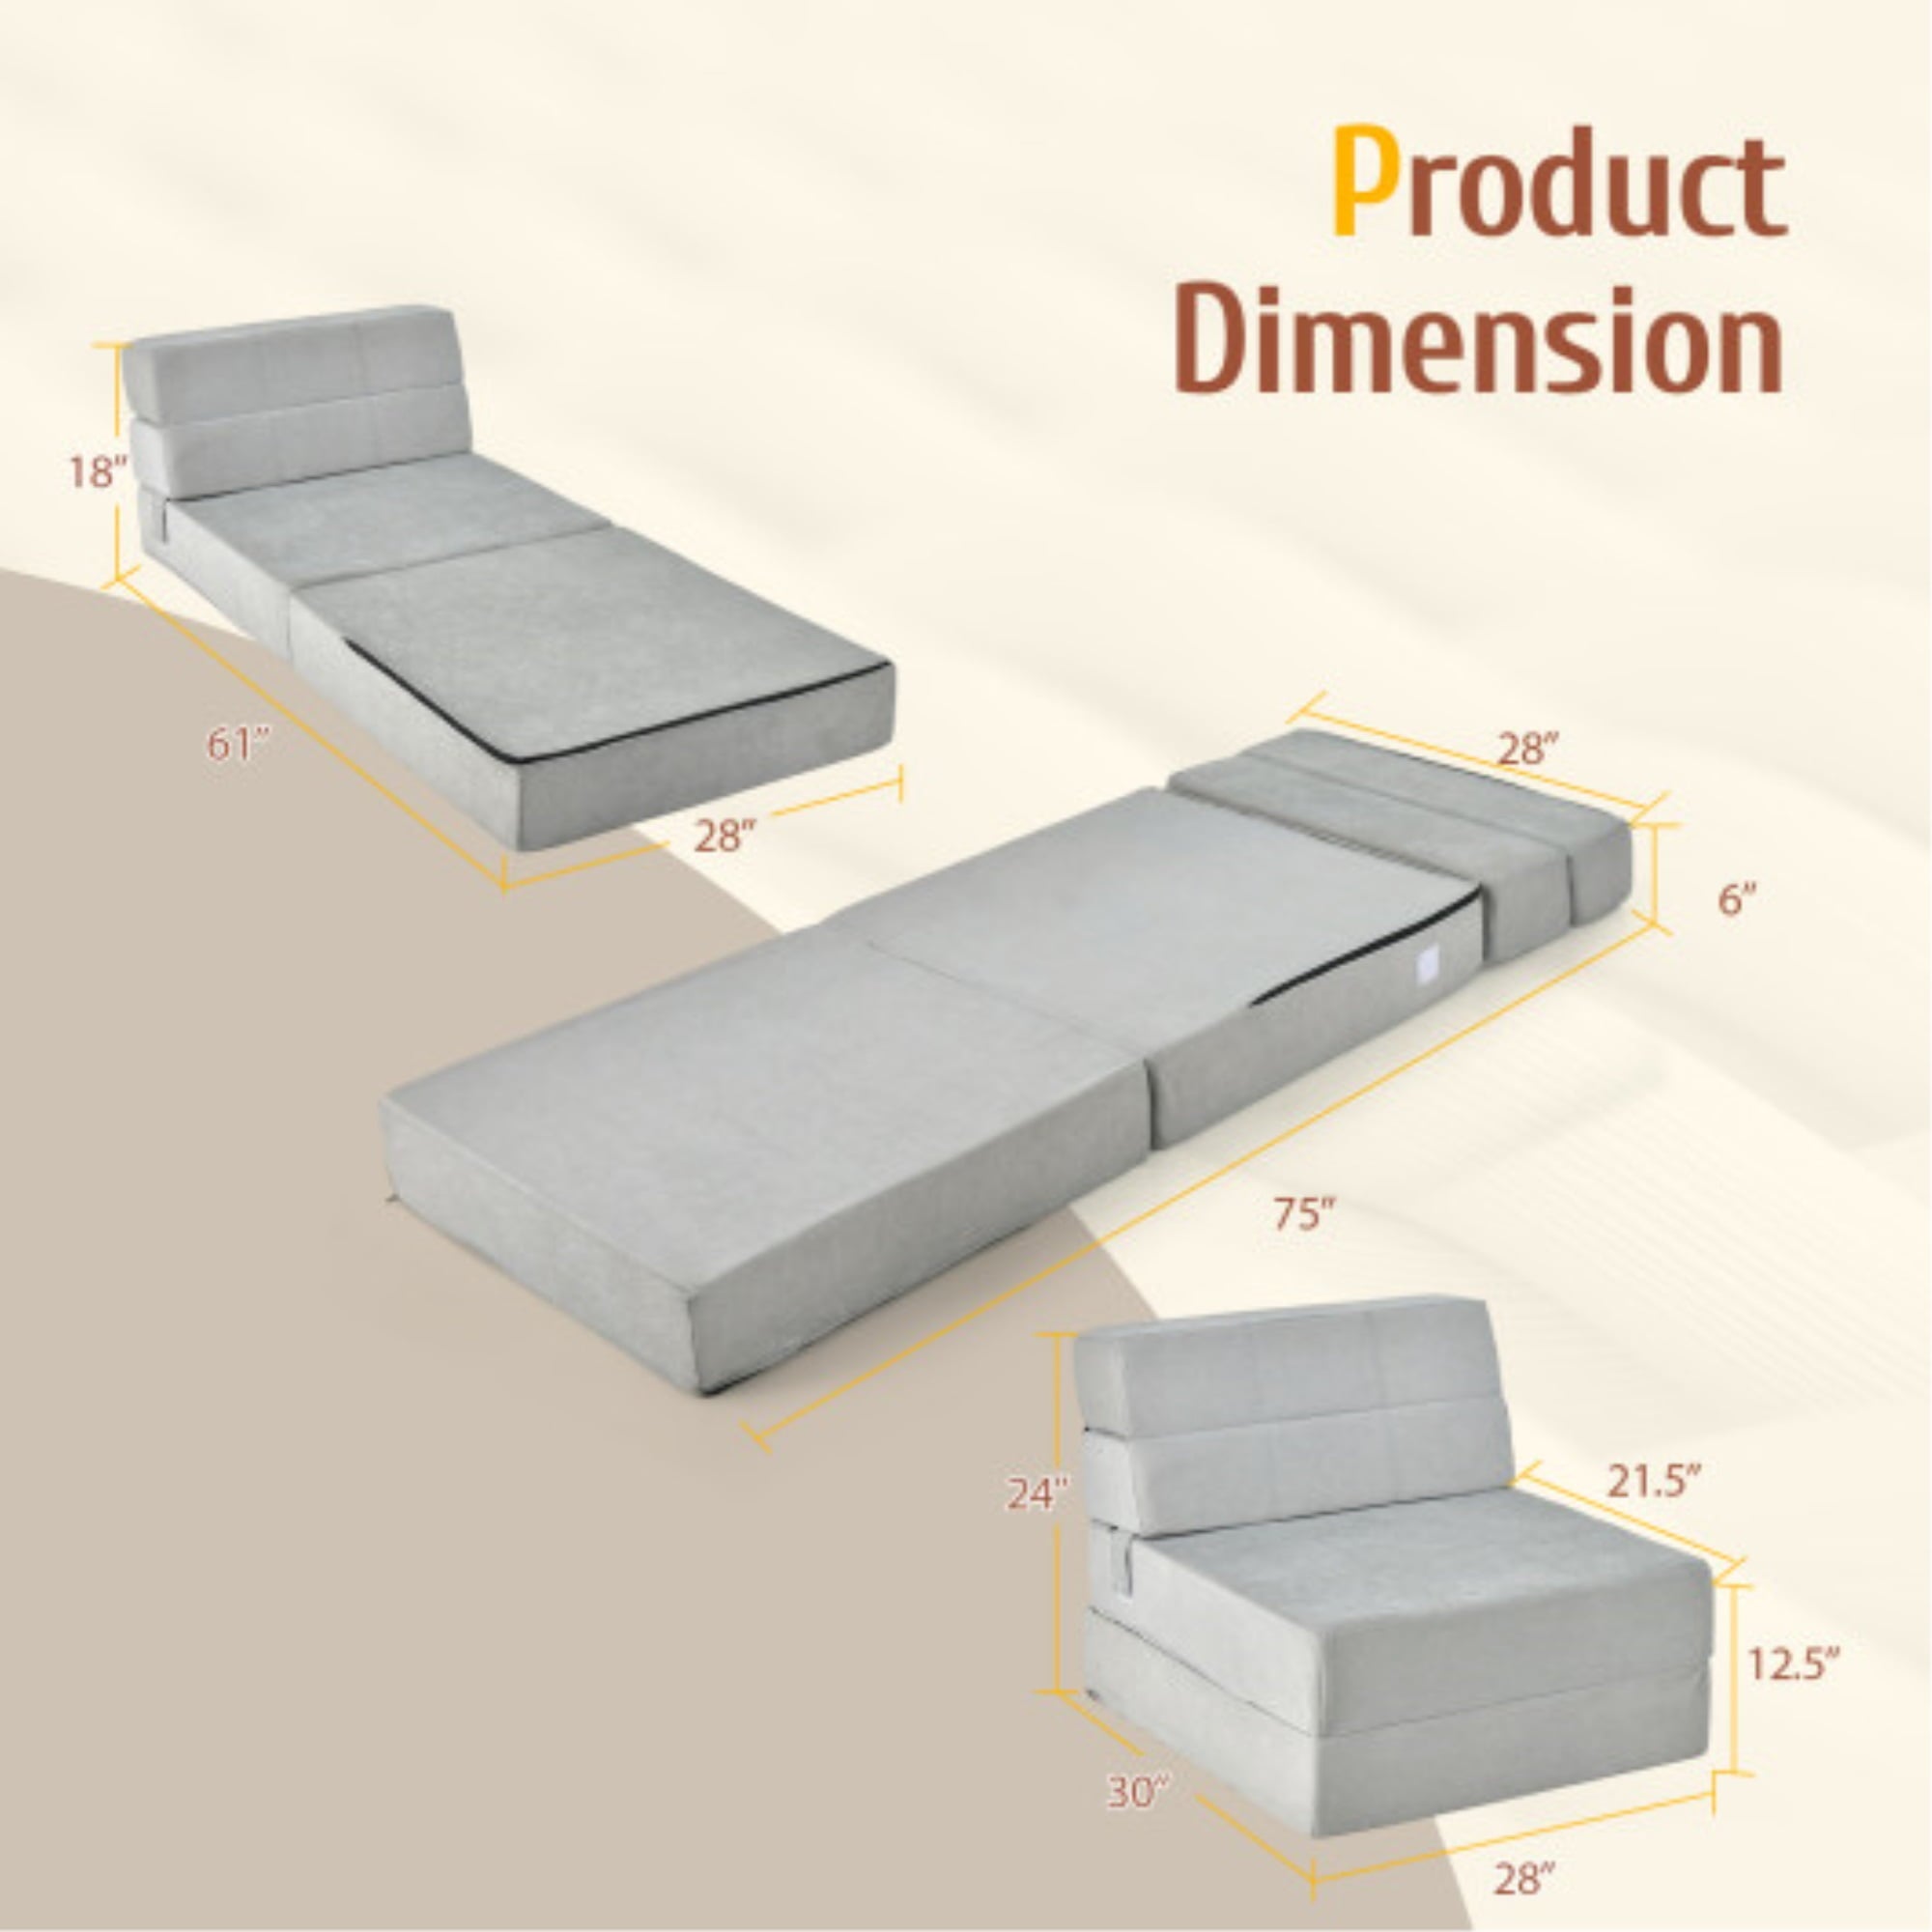 Compact Tri-Fold Sofa Bed: Soft, Comfortable, and Versatile - Coffee